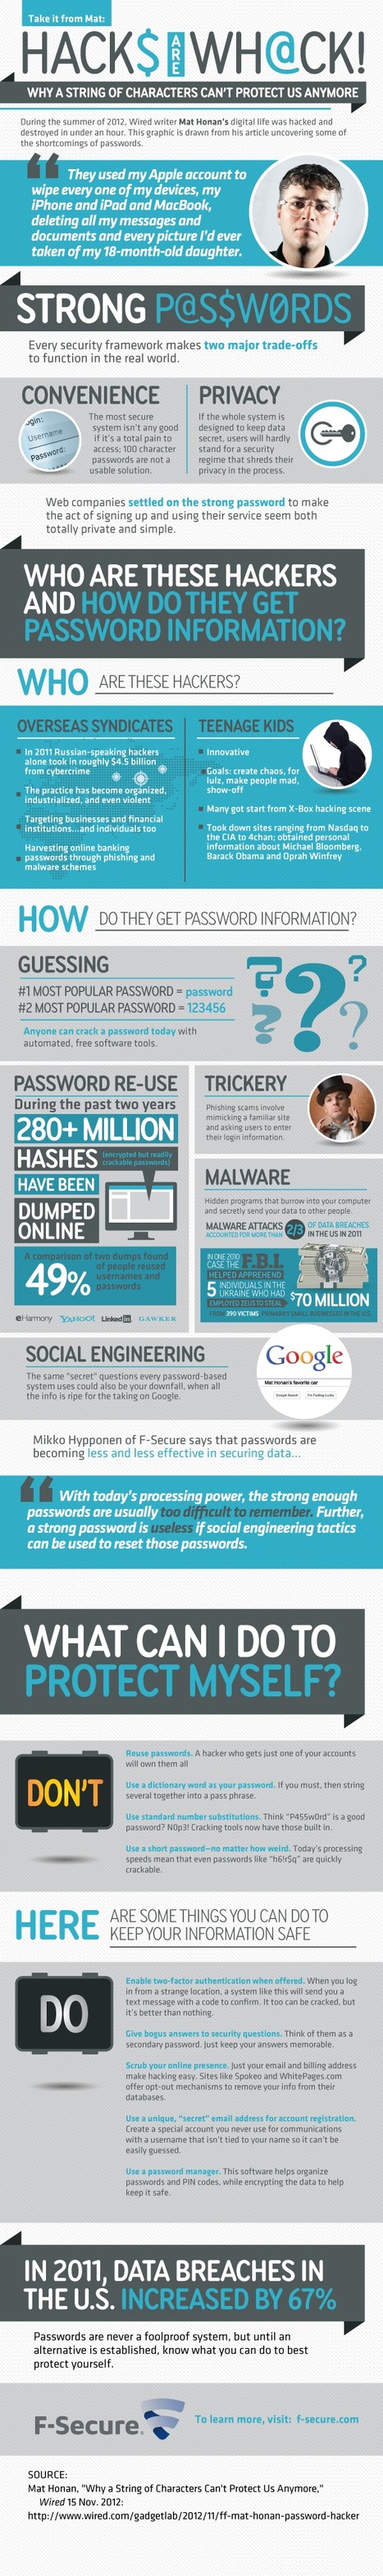 Hacking lessons learned: how to cover your digital ass [Infographic] | Apple, Mac, MacOS, iOS4, iPad, iPhone and (in)security... | Scoop.it